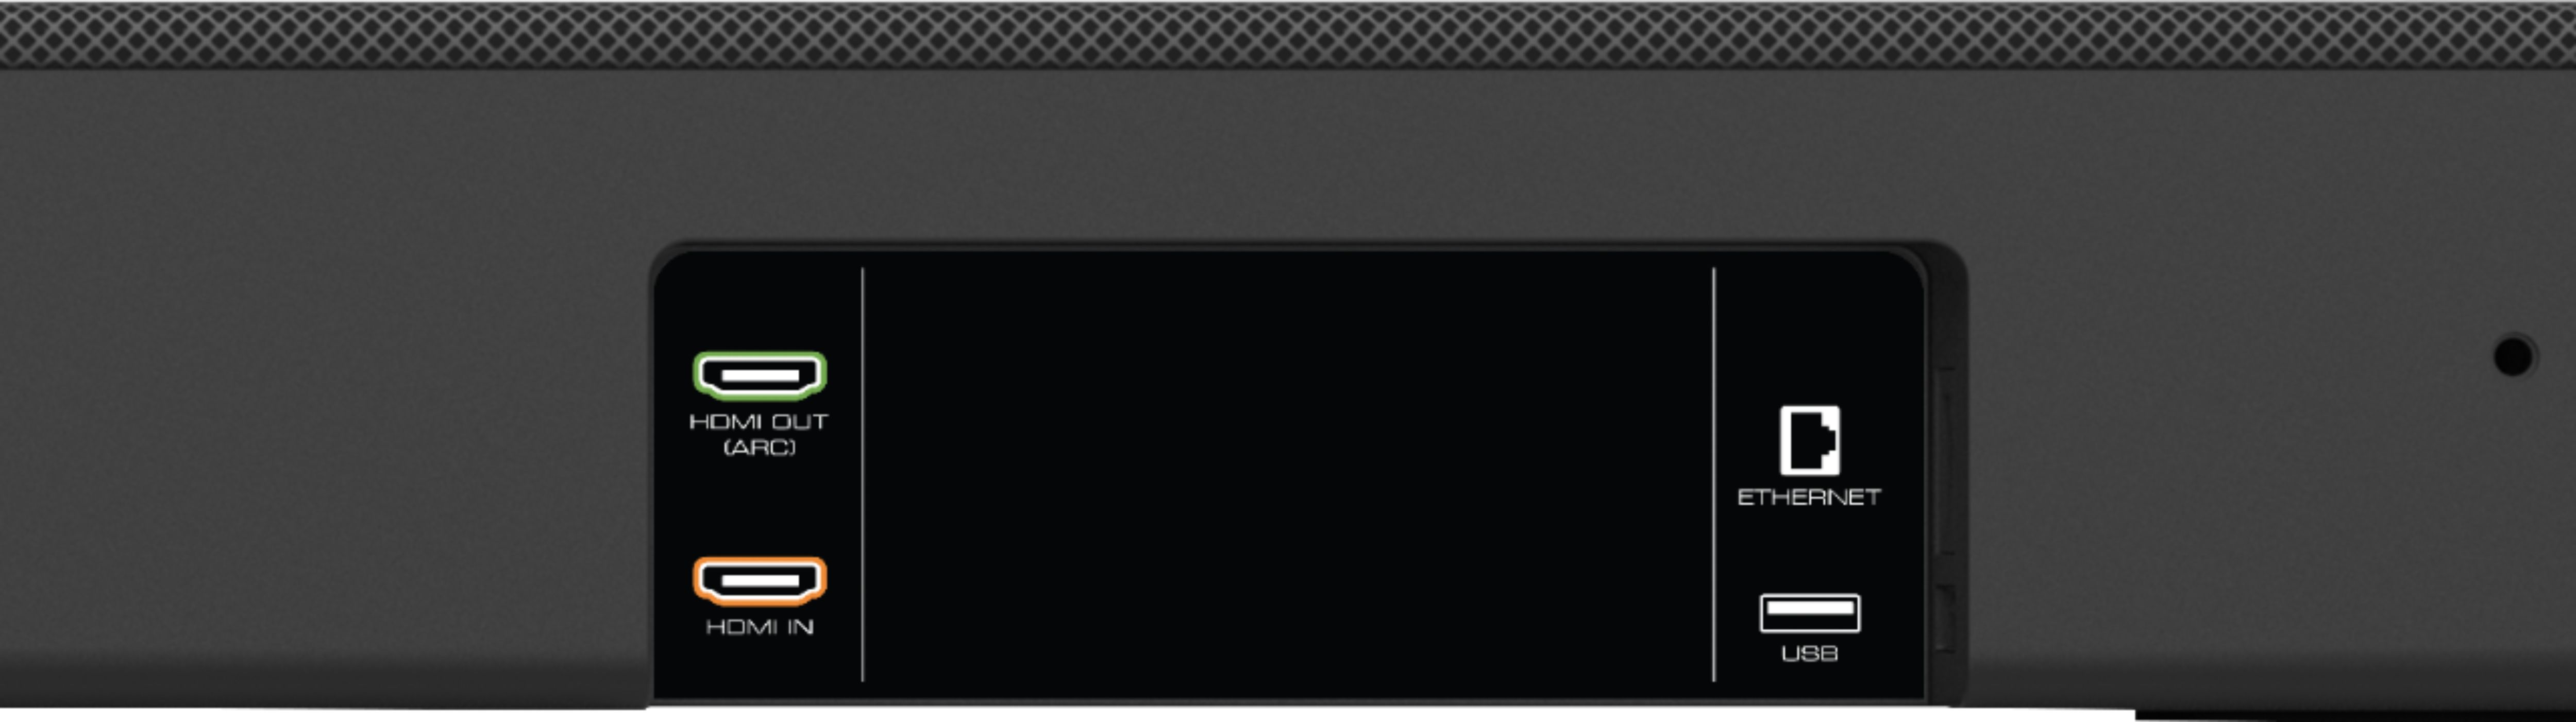 Back View: VIZIO - 5.1.4-Channel Soundbar with Wireless Subwoofer, Dolby Atmos and Voice Assistant - Black